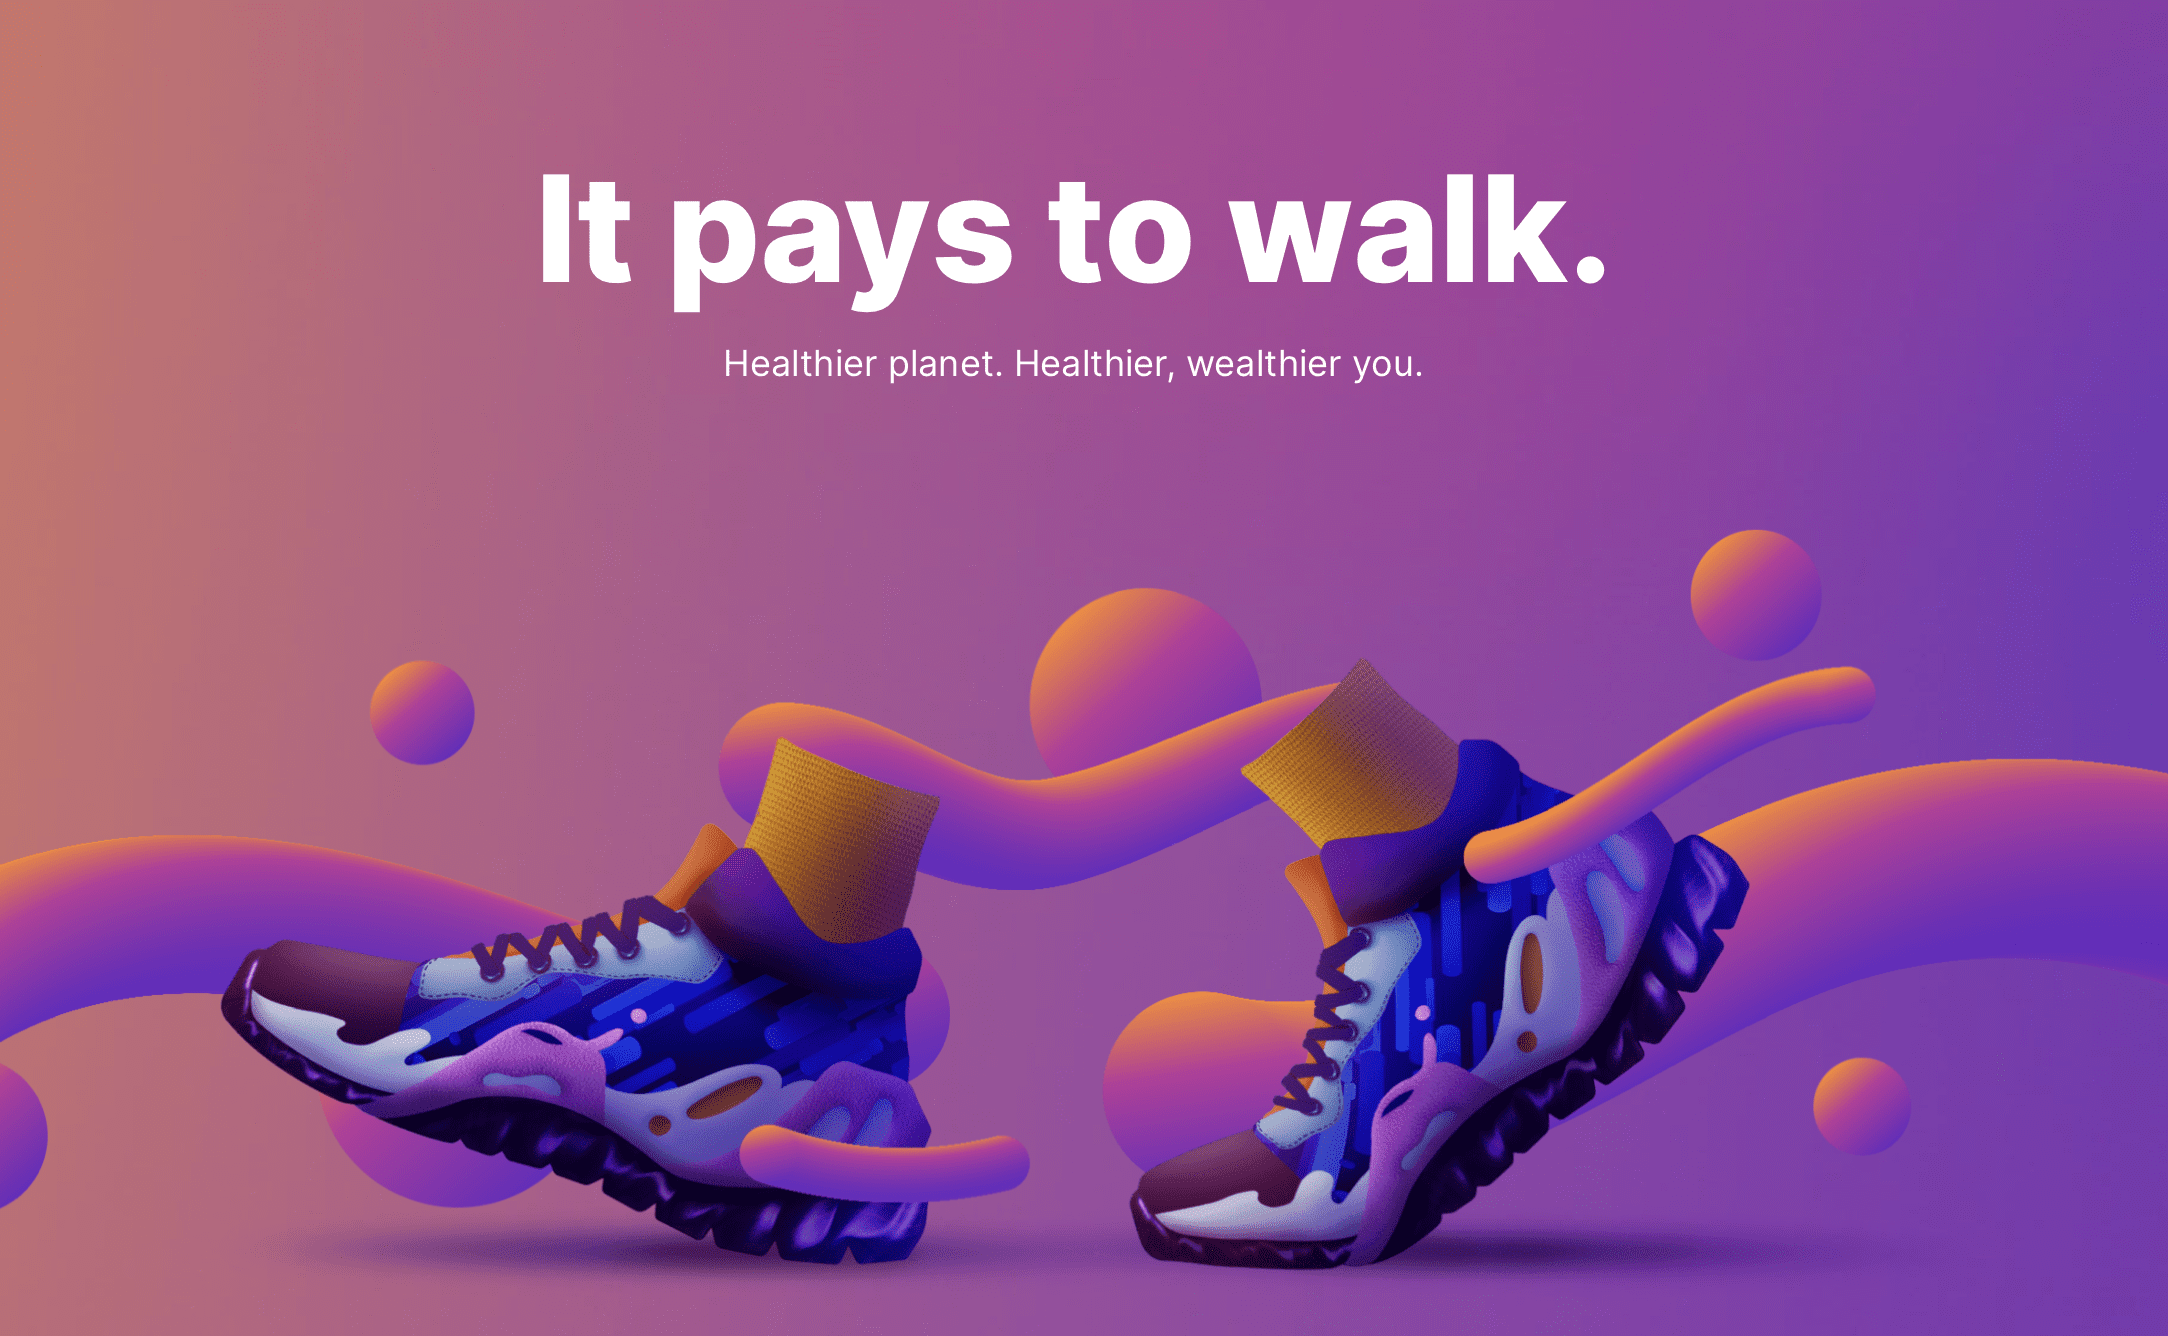 Get Paid For Walking, Pretty Sweet Deal